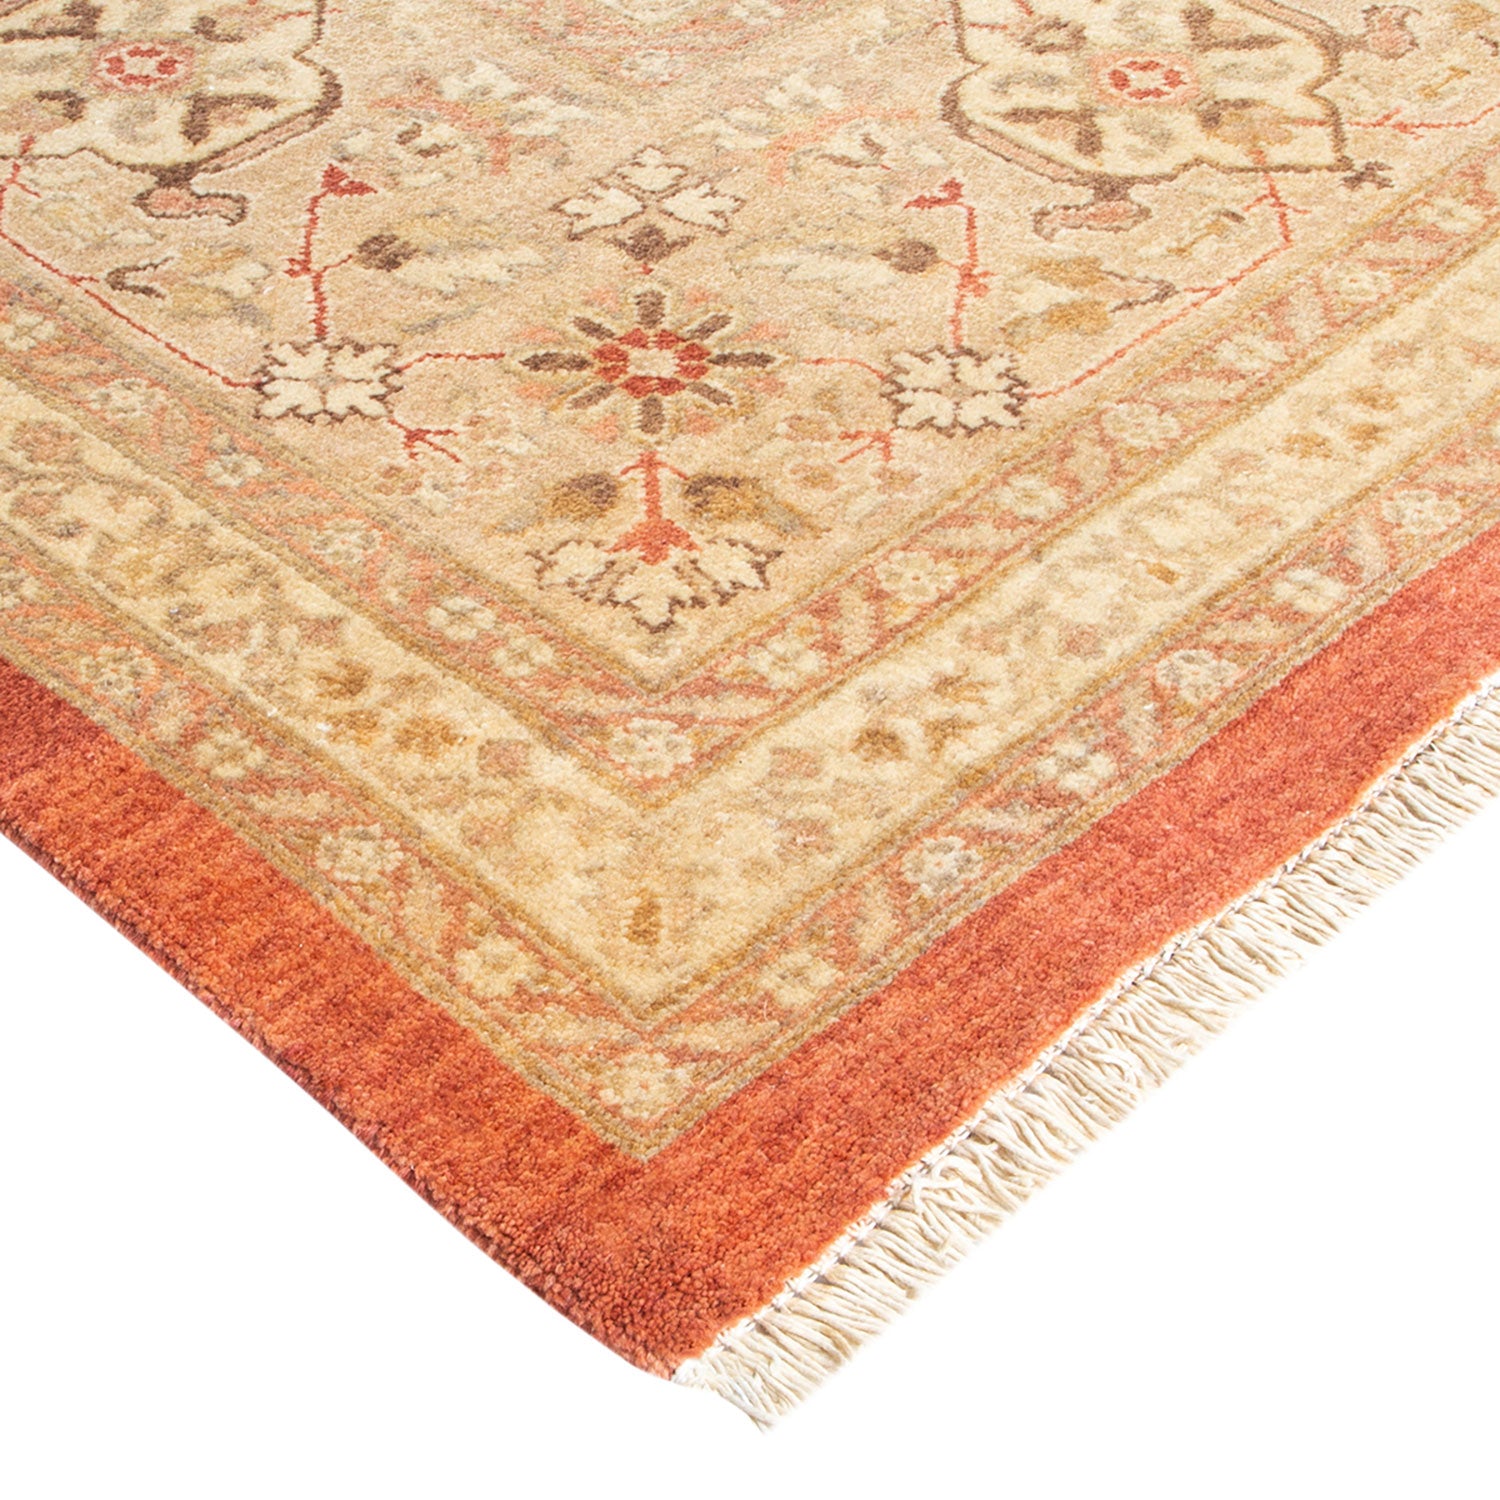 Intricate Persian-inspired rug with symmetrical patterns and rich color palette.